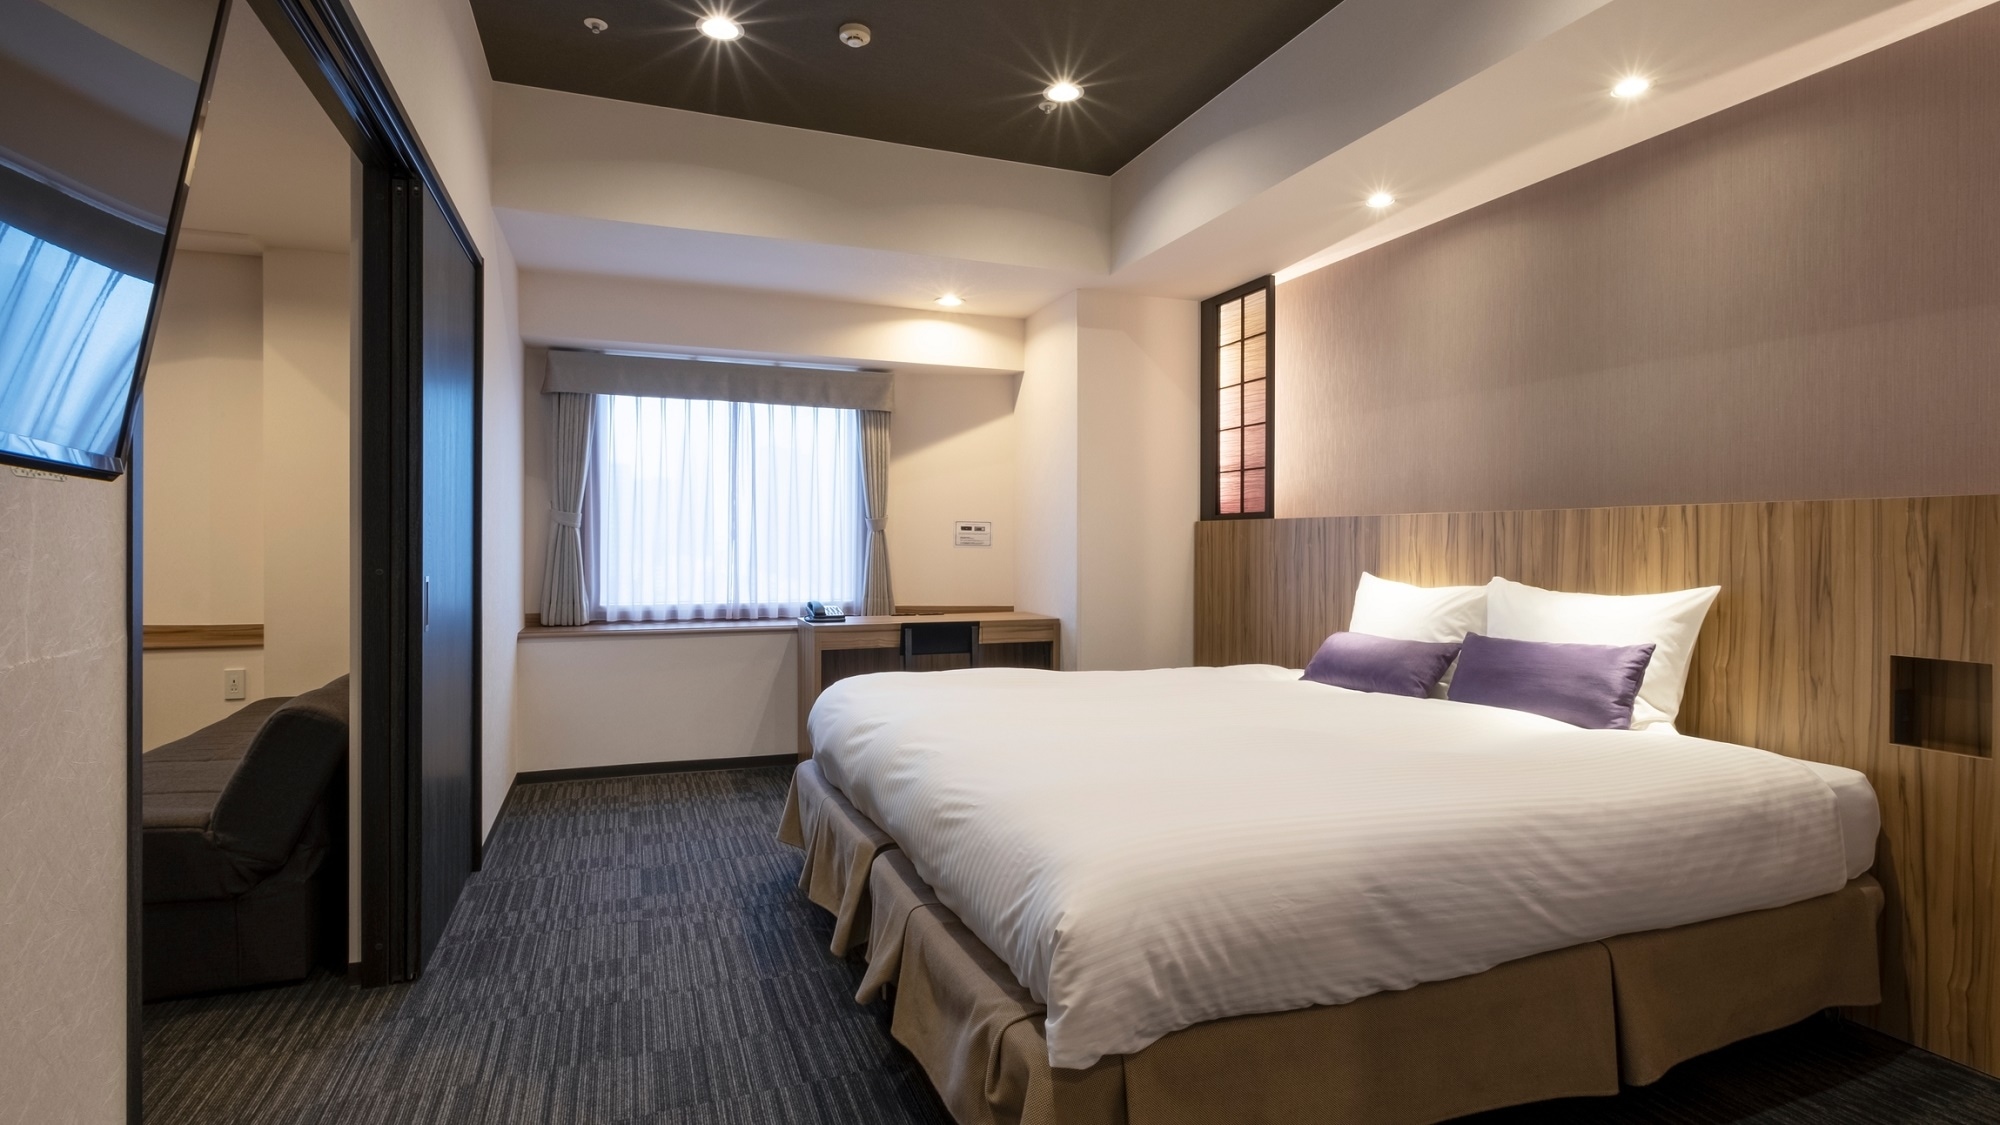 ◆Junior Suite Prime | Up to 4 people can stay with 1 king bed and an extra bed.